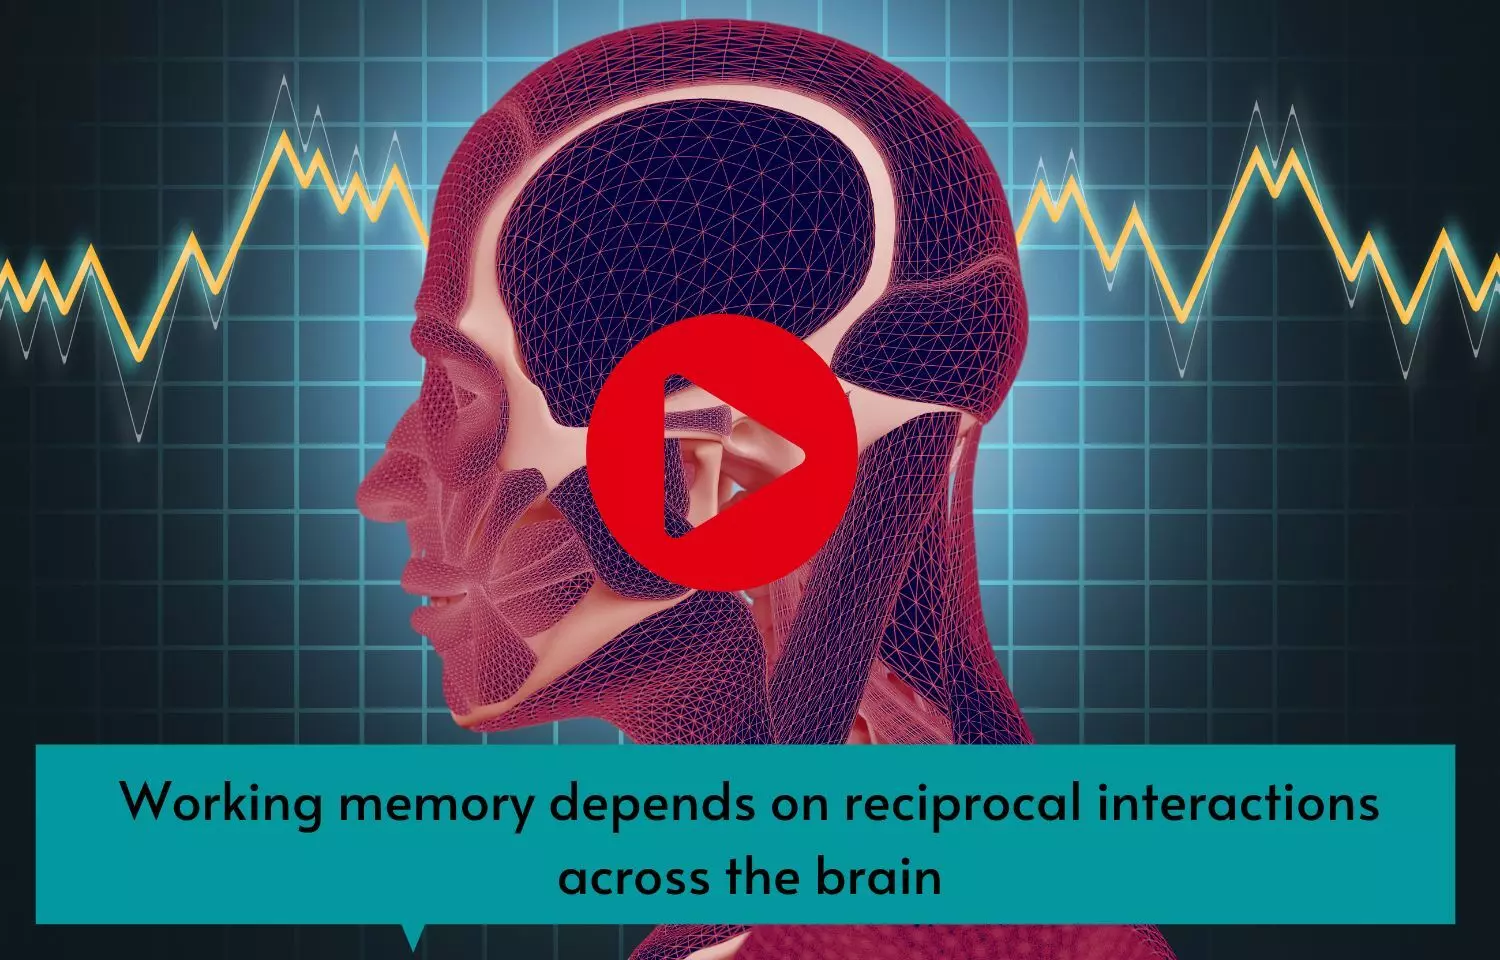 Working memory depends on reciprocal interactions across the brain